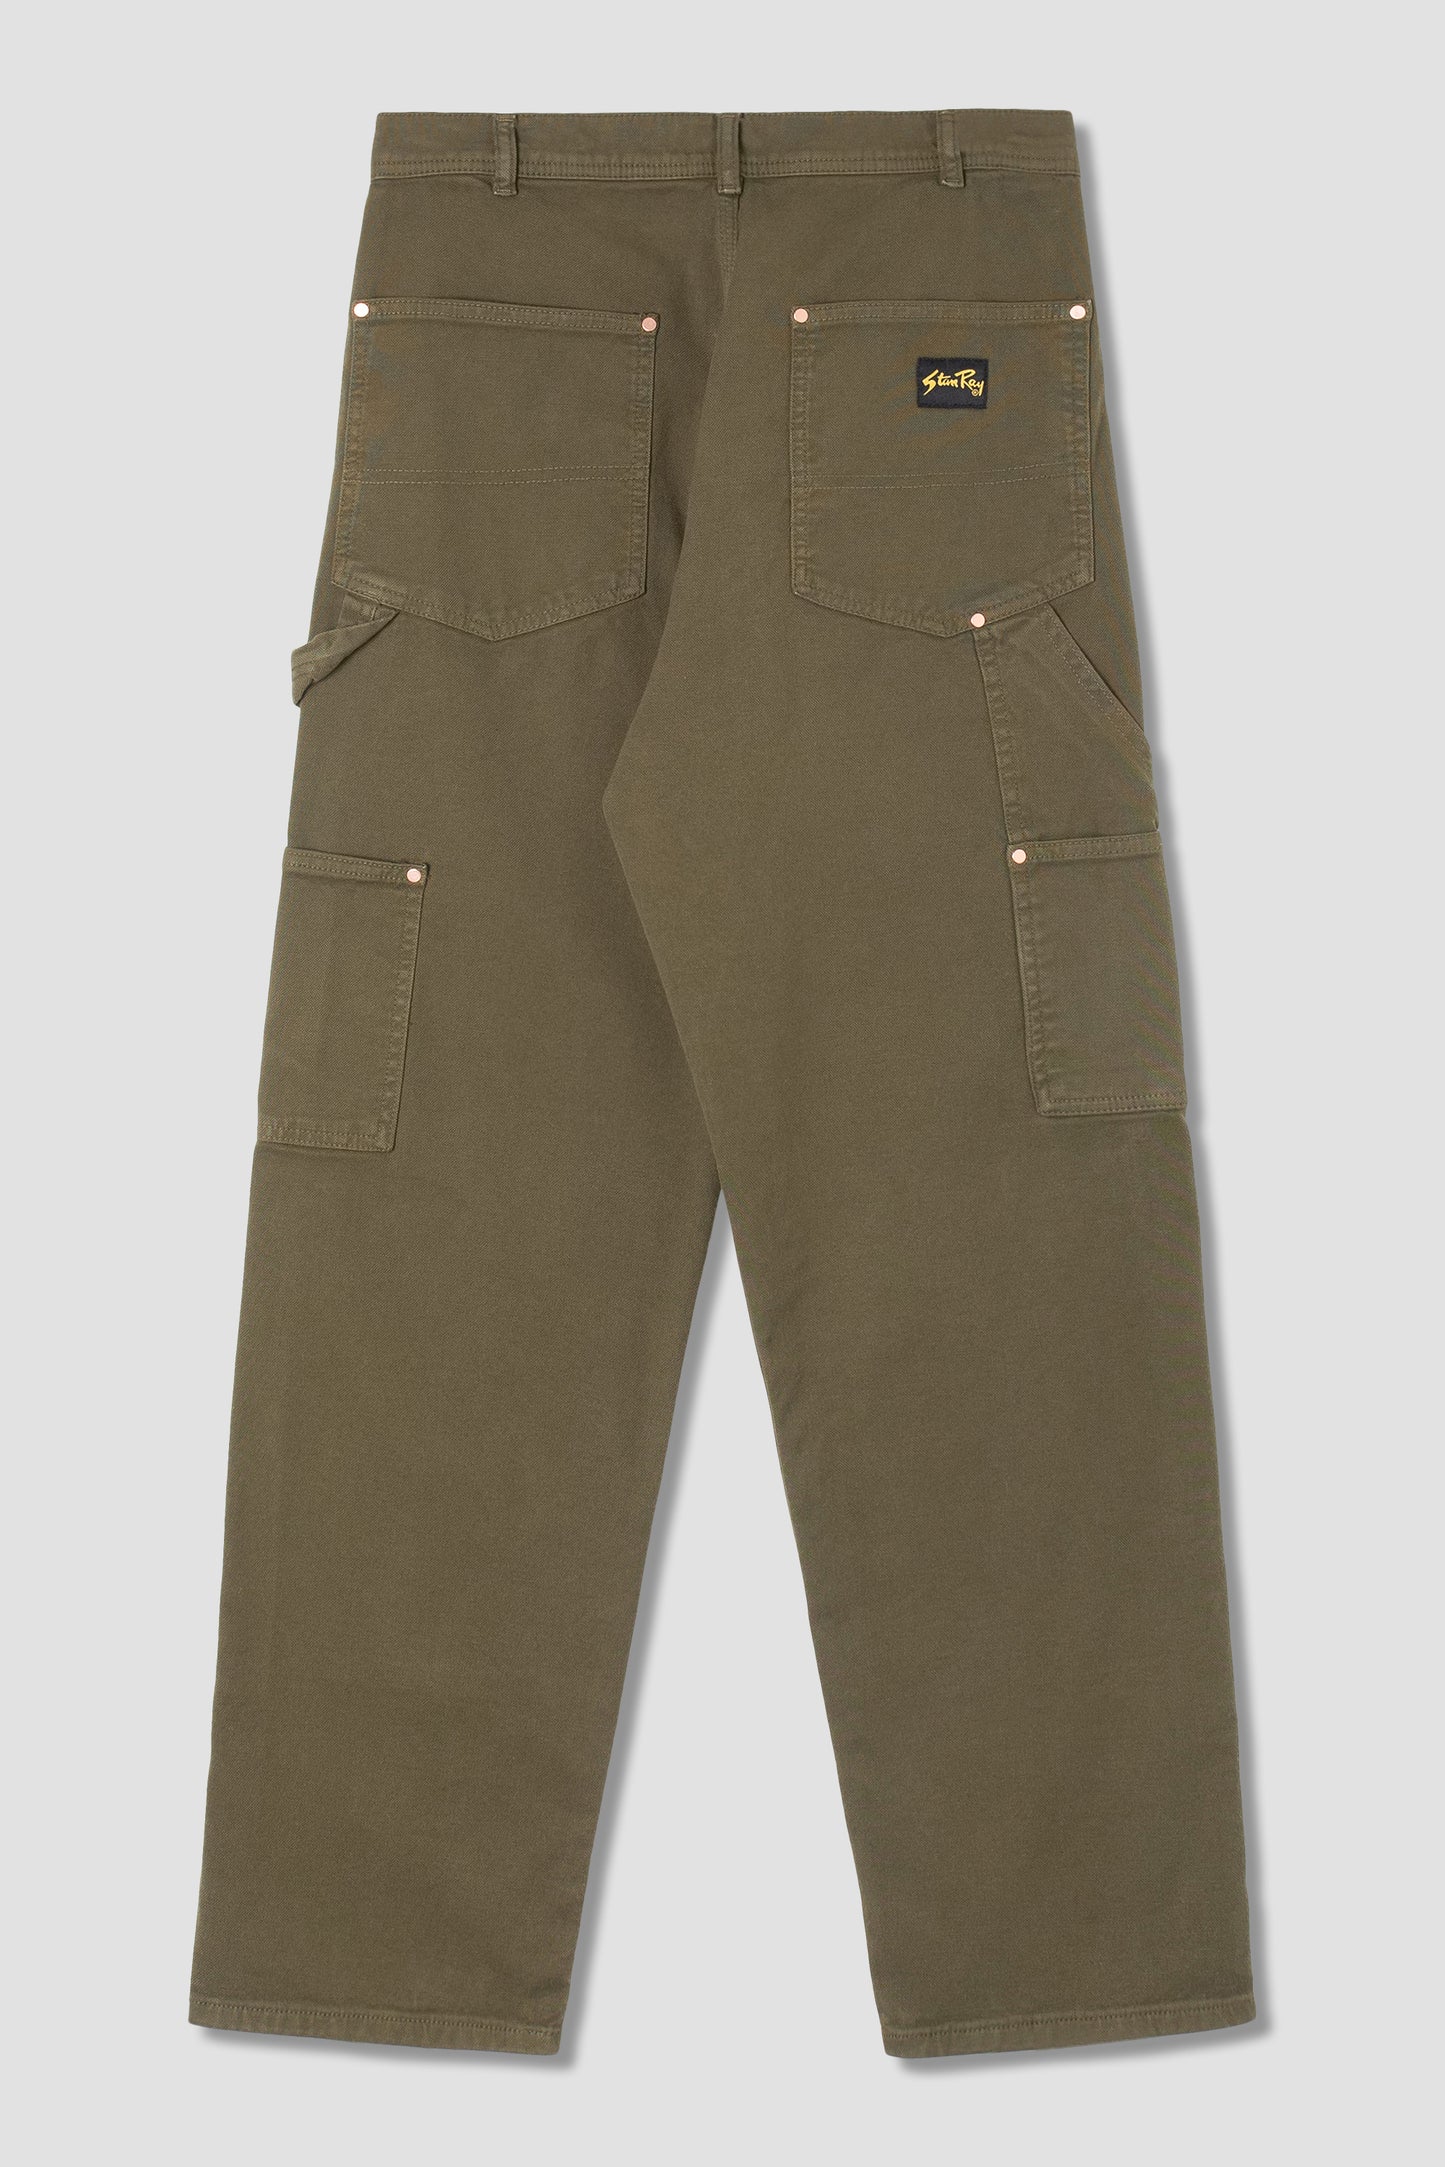 Double Knee Pant (Olive Duck)